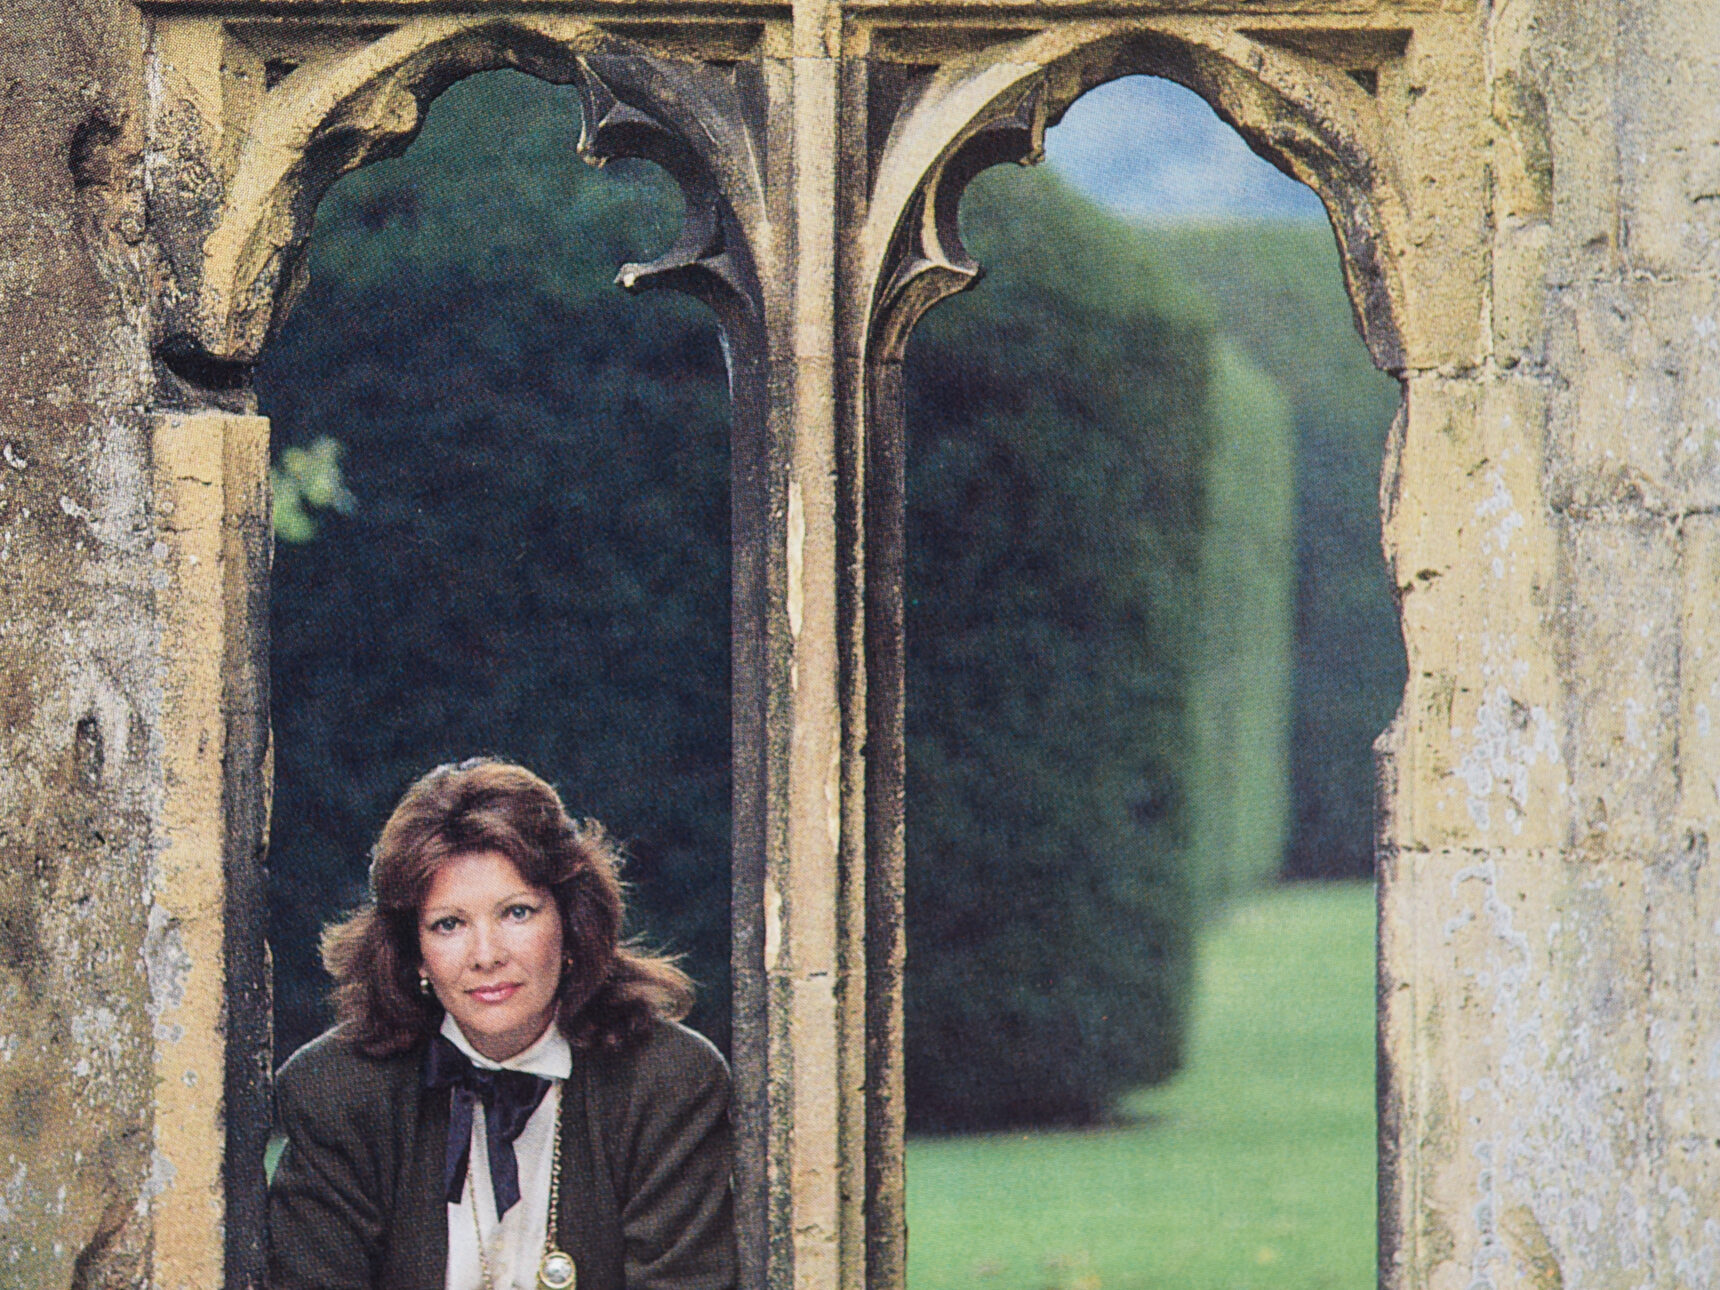 Sharing Sudeley's history has been Lady Ashcombe's life's work